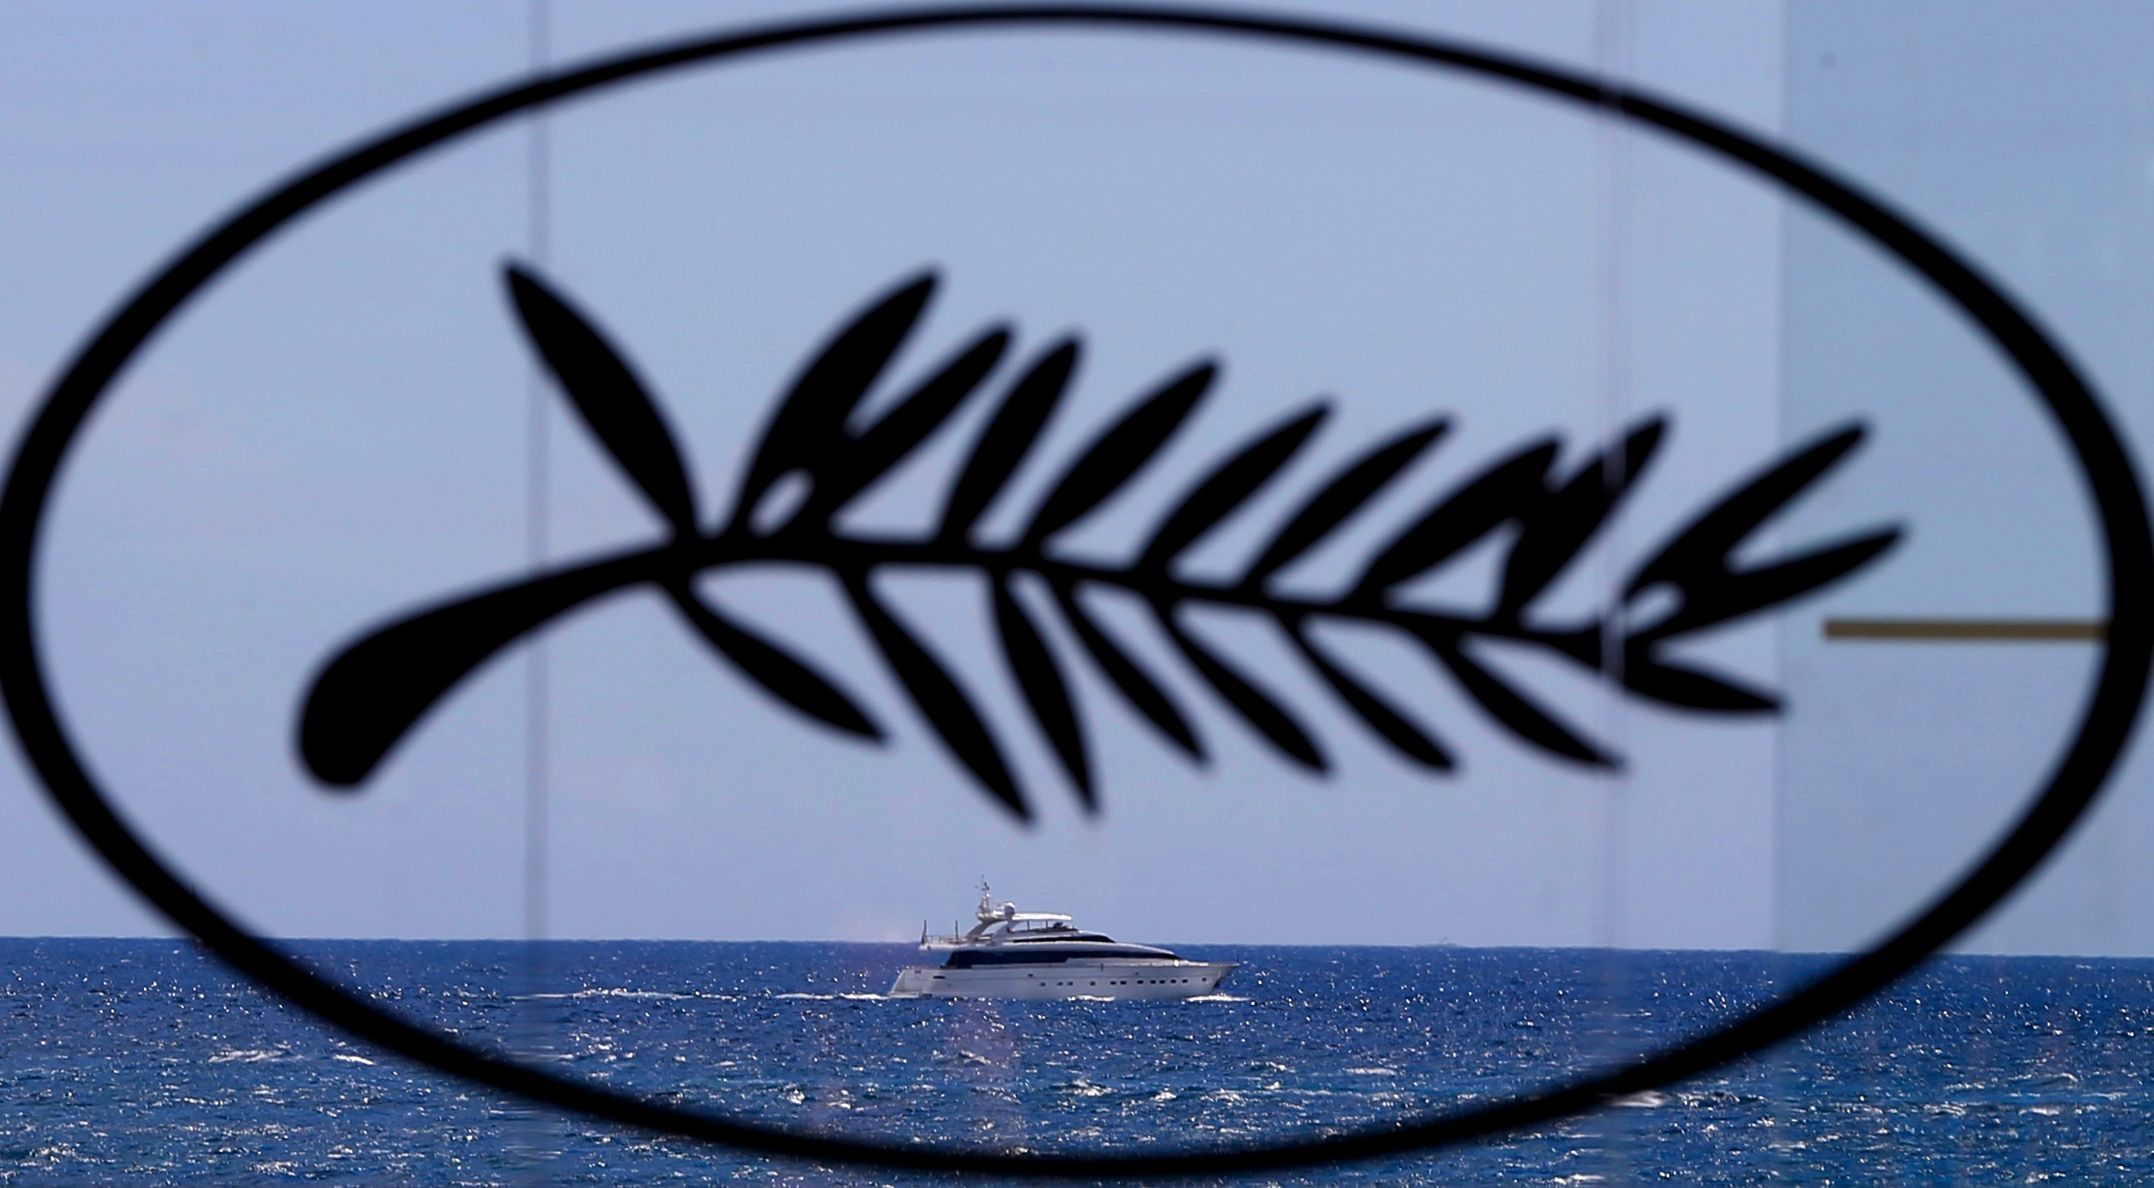 A yacht is seen in the Bay of Cannes through a Palme d'Or symbol on the eve of the opening of the 67th Cannes Film Festival in Cannes